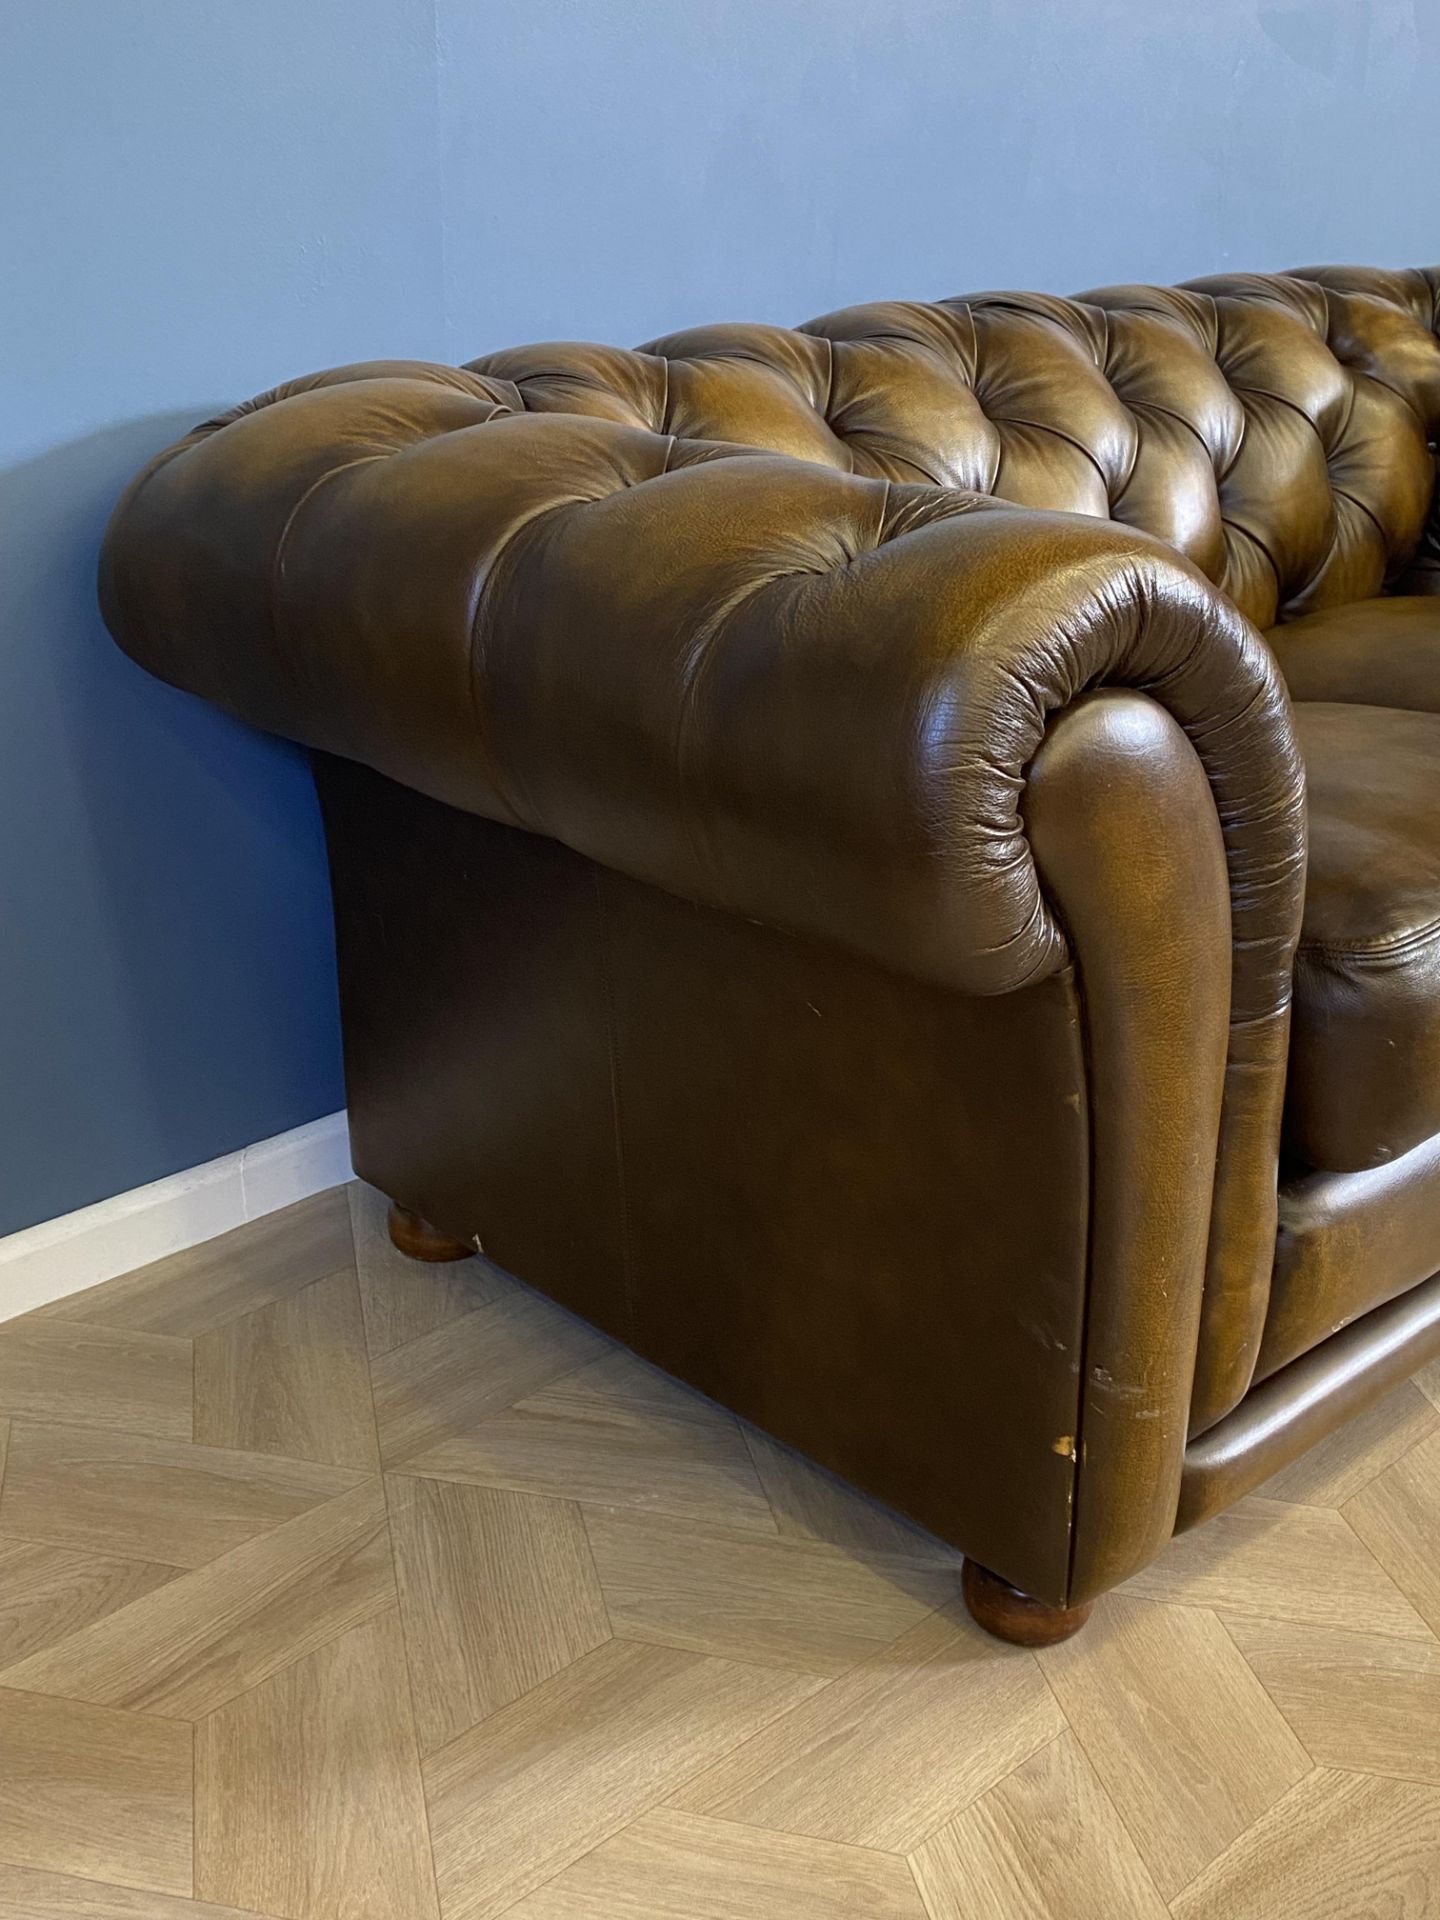 Button back leather two seat Chesterfield sofa - Image 4 of 11